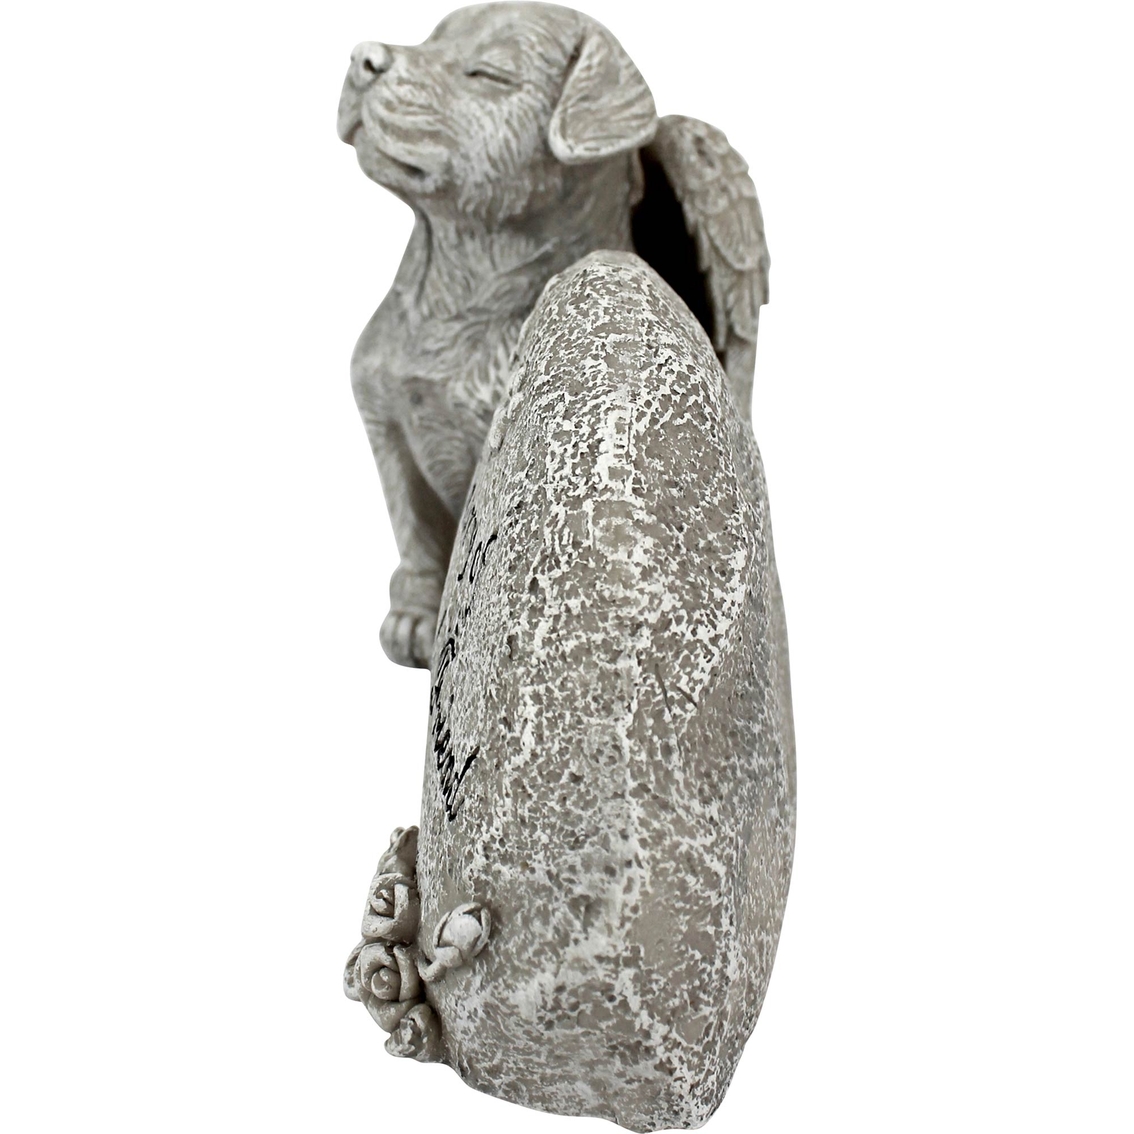 Design Toscano Forever in Our Hearts Memorial Dog Statue - Image 2 of 4